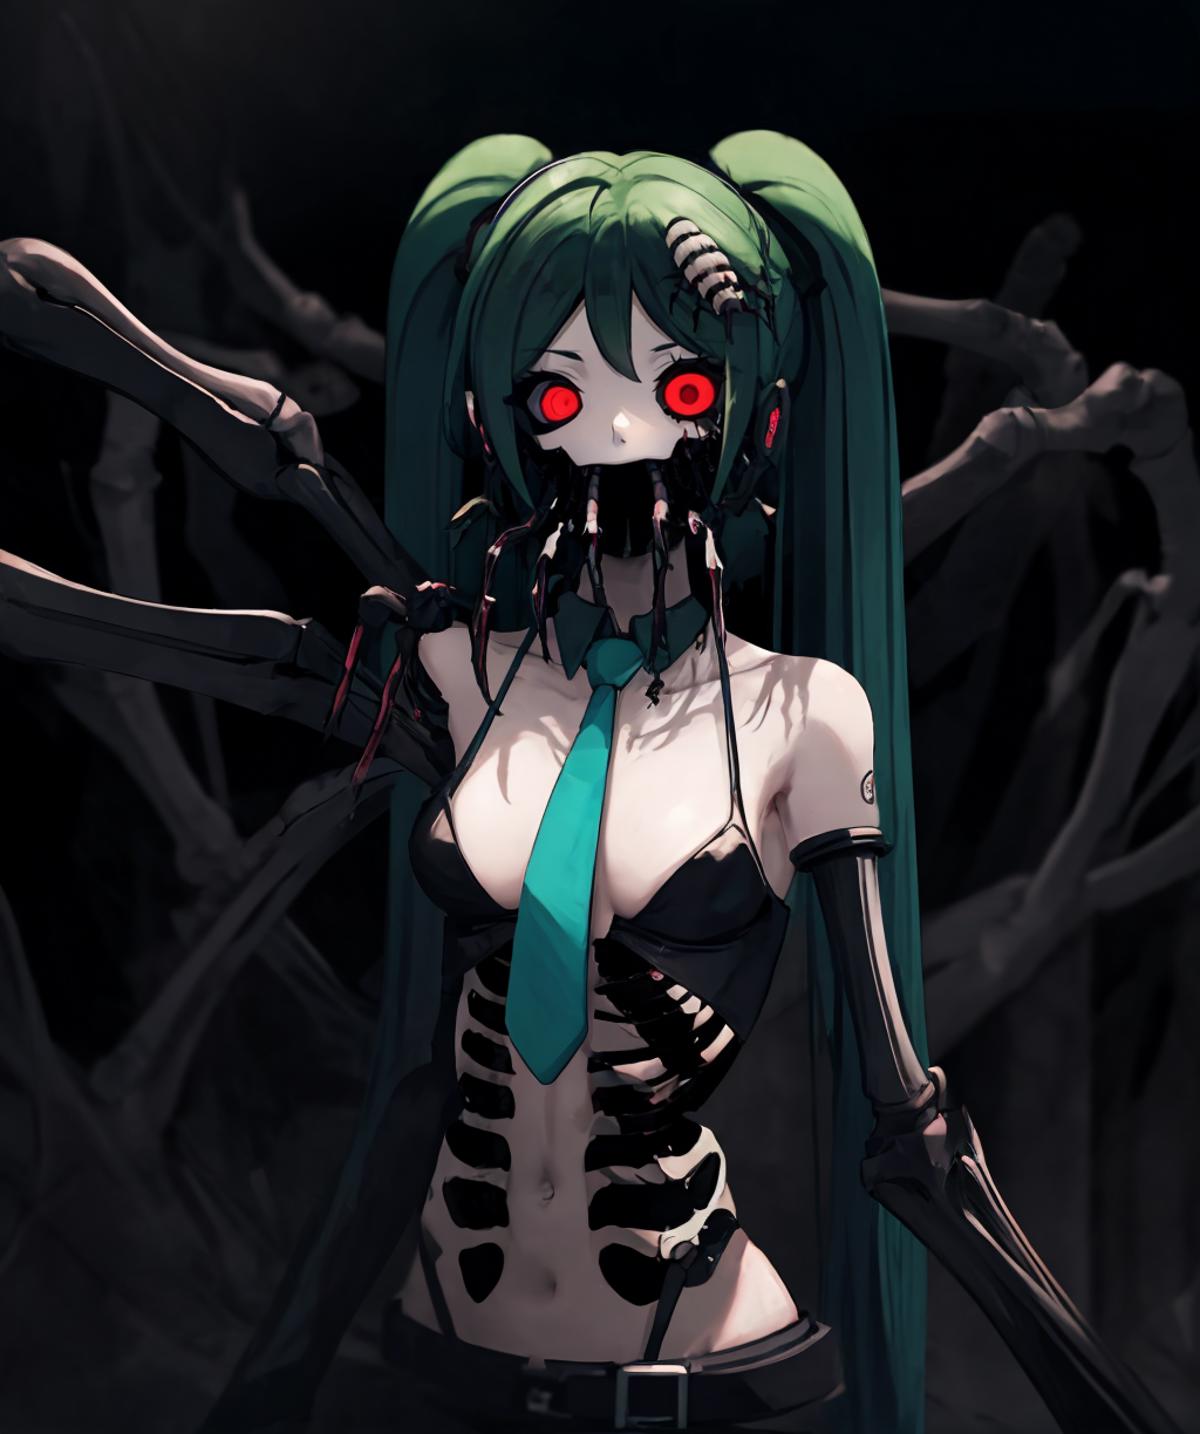 Bacterial Contamination image by Lembont